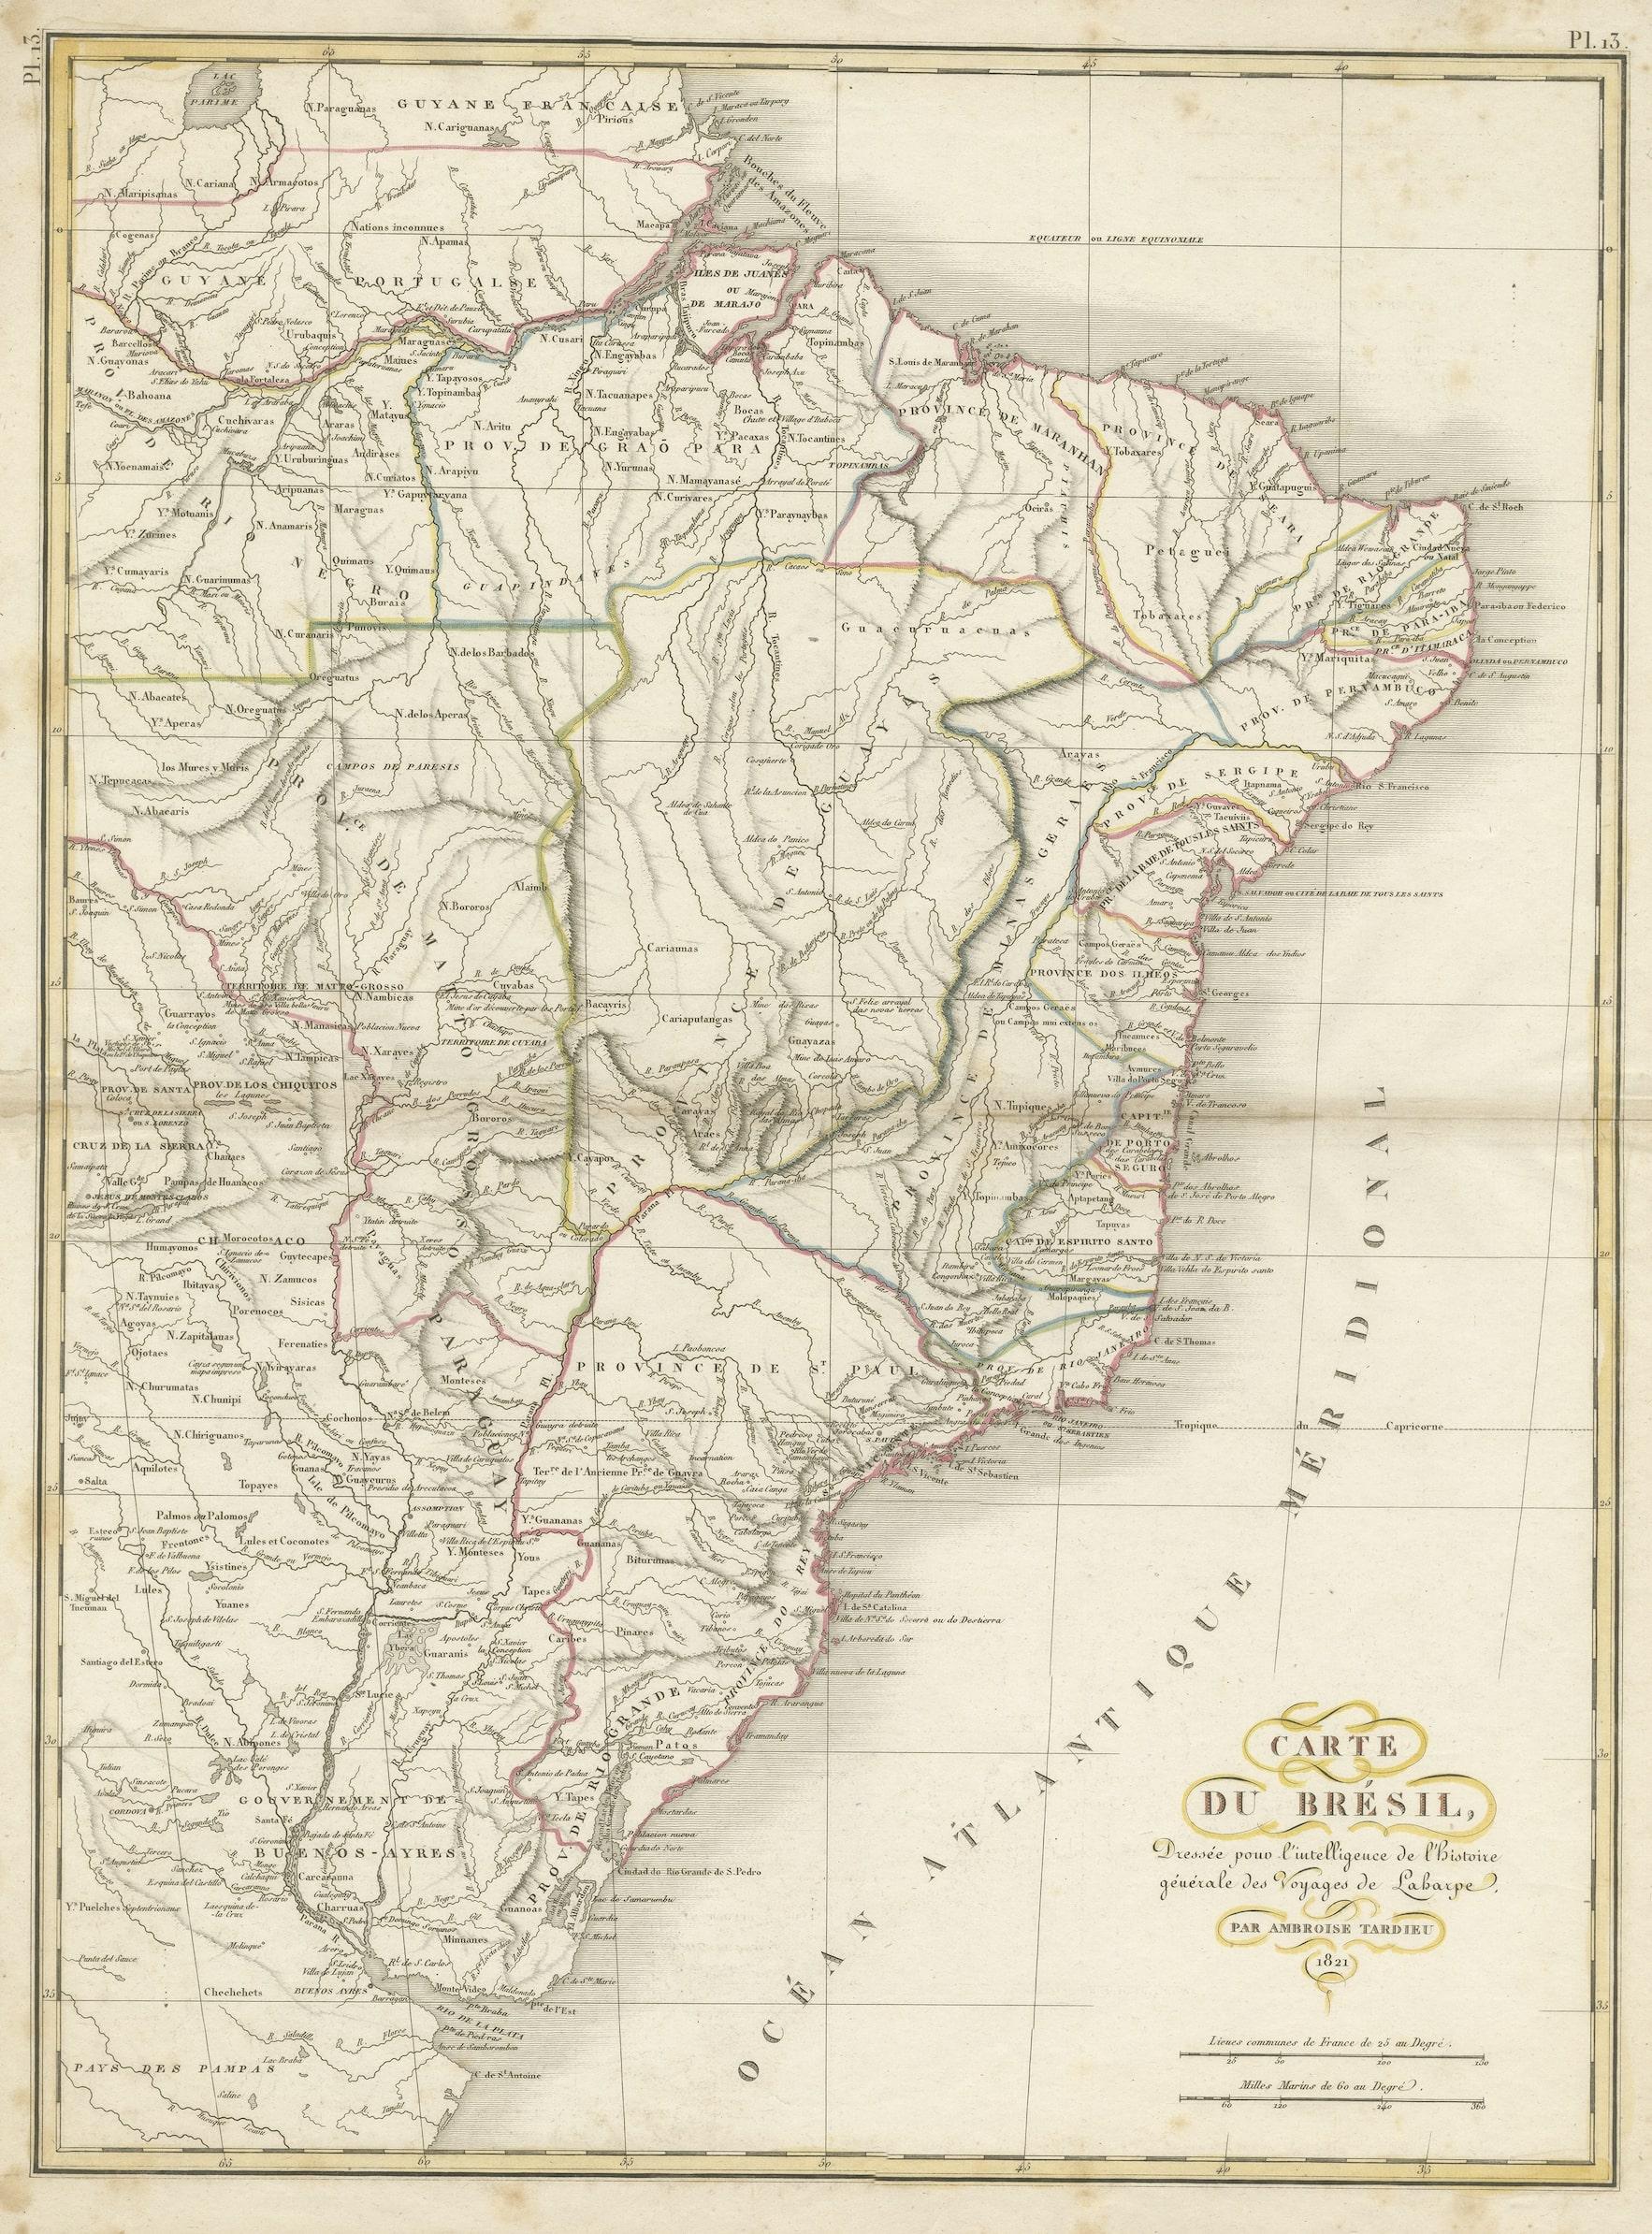 Antique map titled 'Carte du Brésil'. ?Beautiful map of Brazil extending south to the mouth of the Rio de la Plata and Buenos-Aires in Argentina. Published by Tardieu, 1821. 

Pierre Antoine Tardieu (1784-1869), also known to sign his works as PF